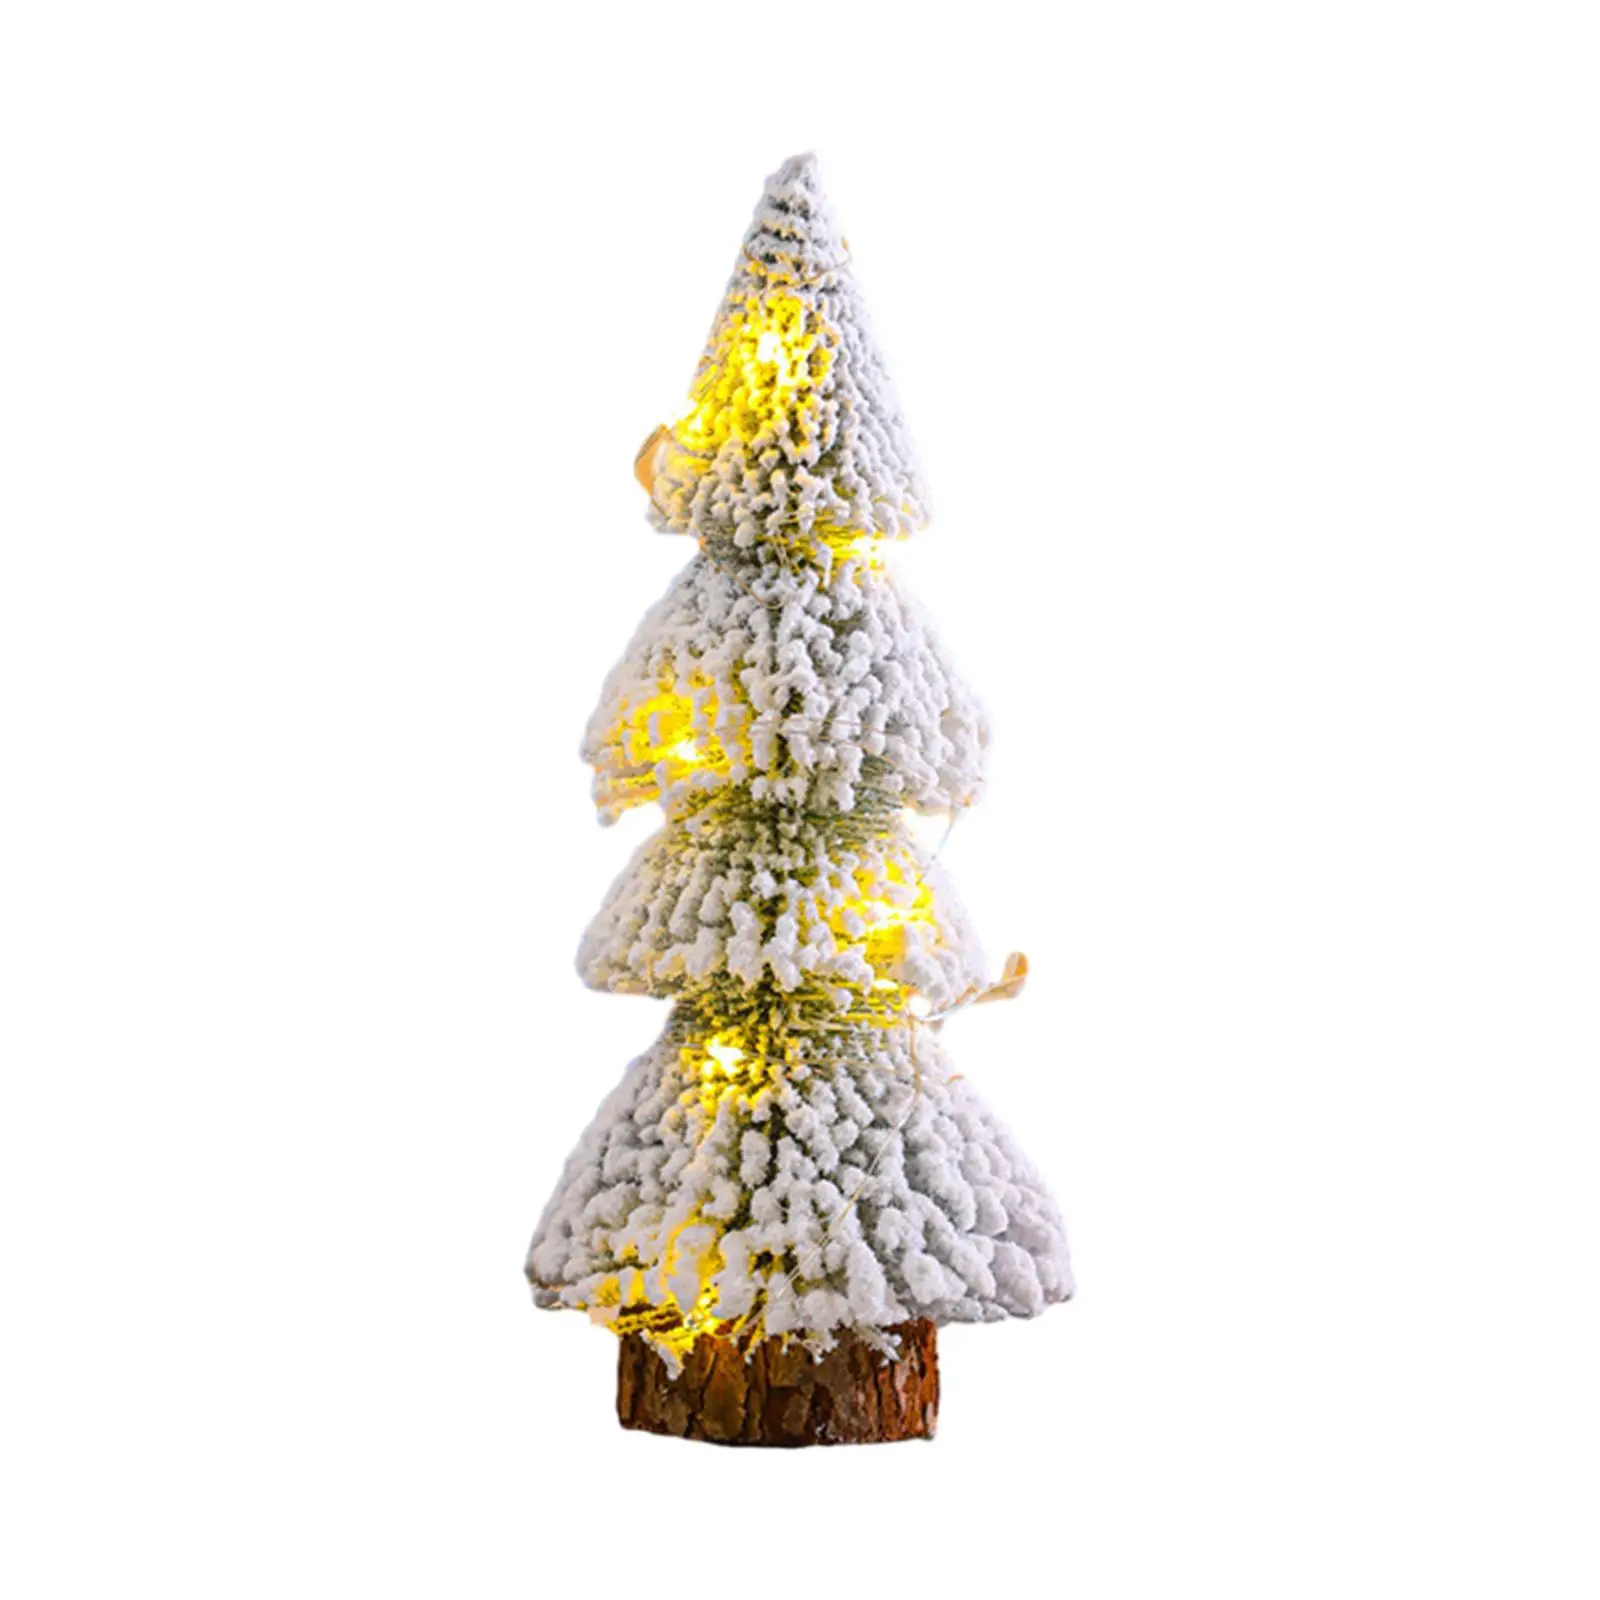 Snow Flocked Christmas Tree with LED Lights Vintage Artificial Mini Snowy Tree for Christmas Holiday Table Home Indoor